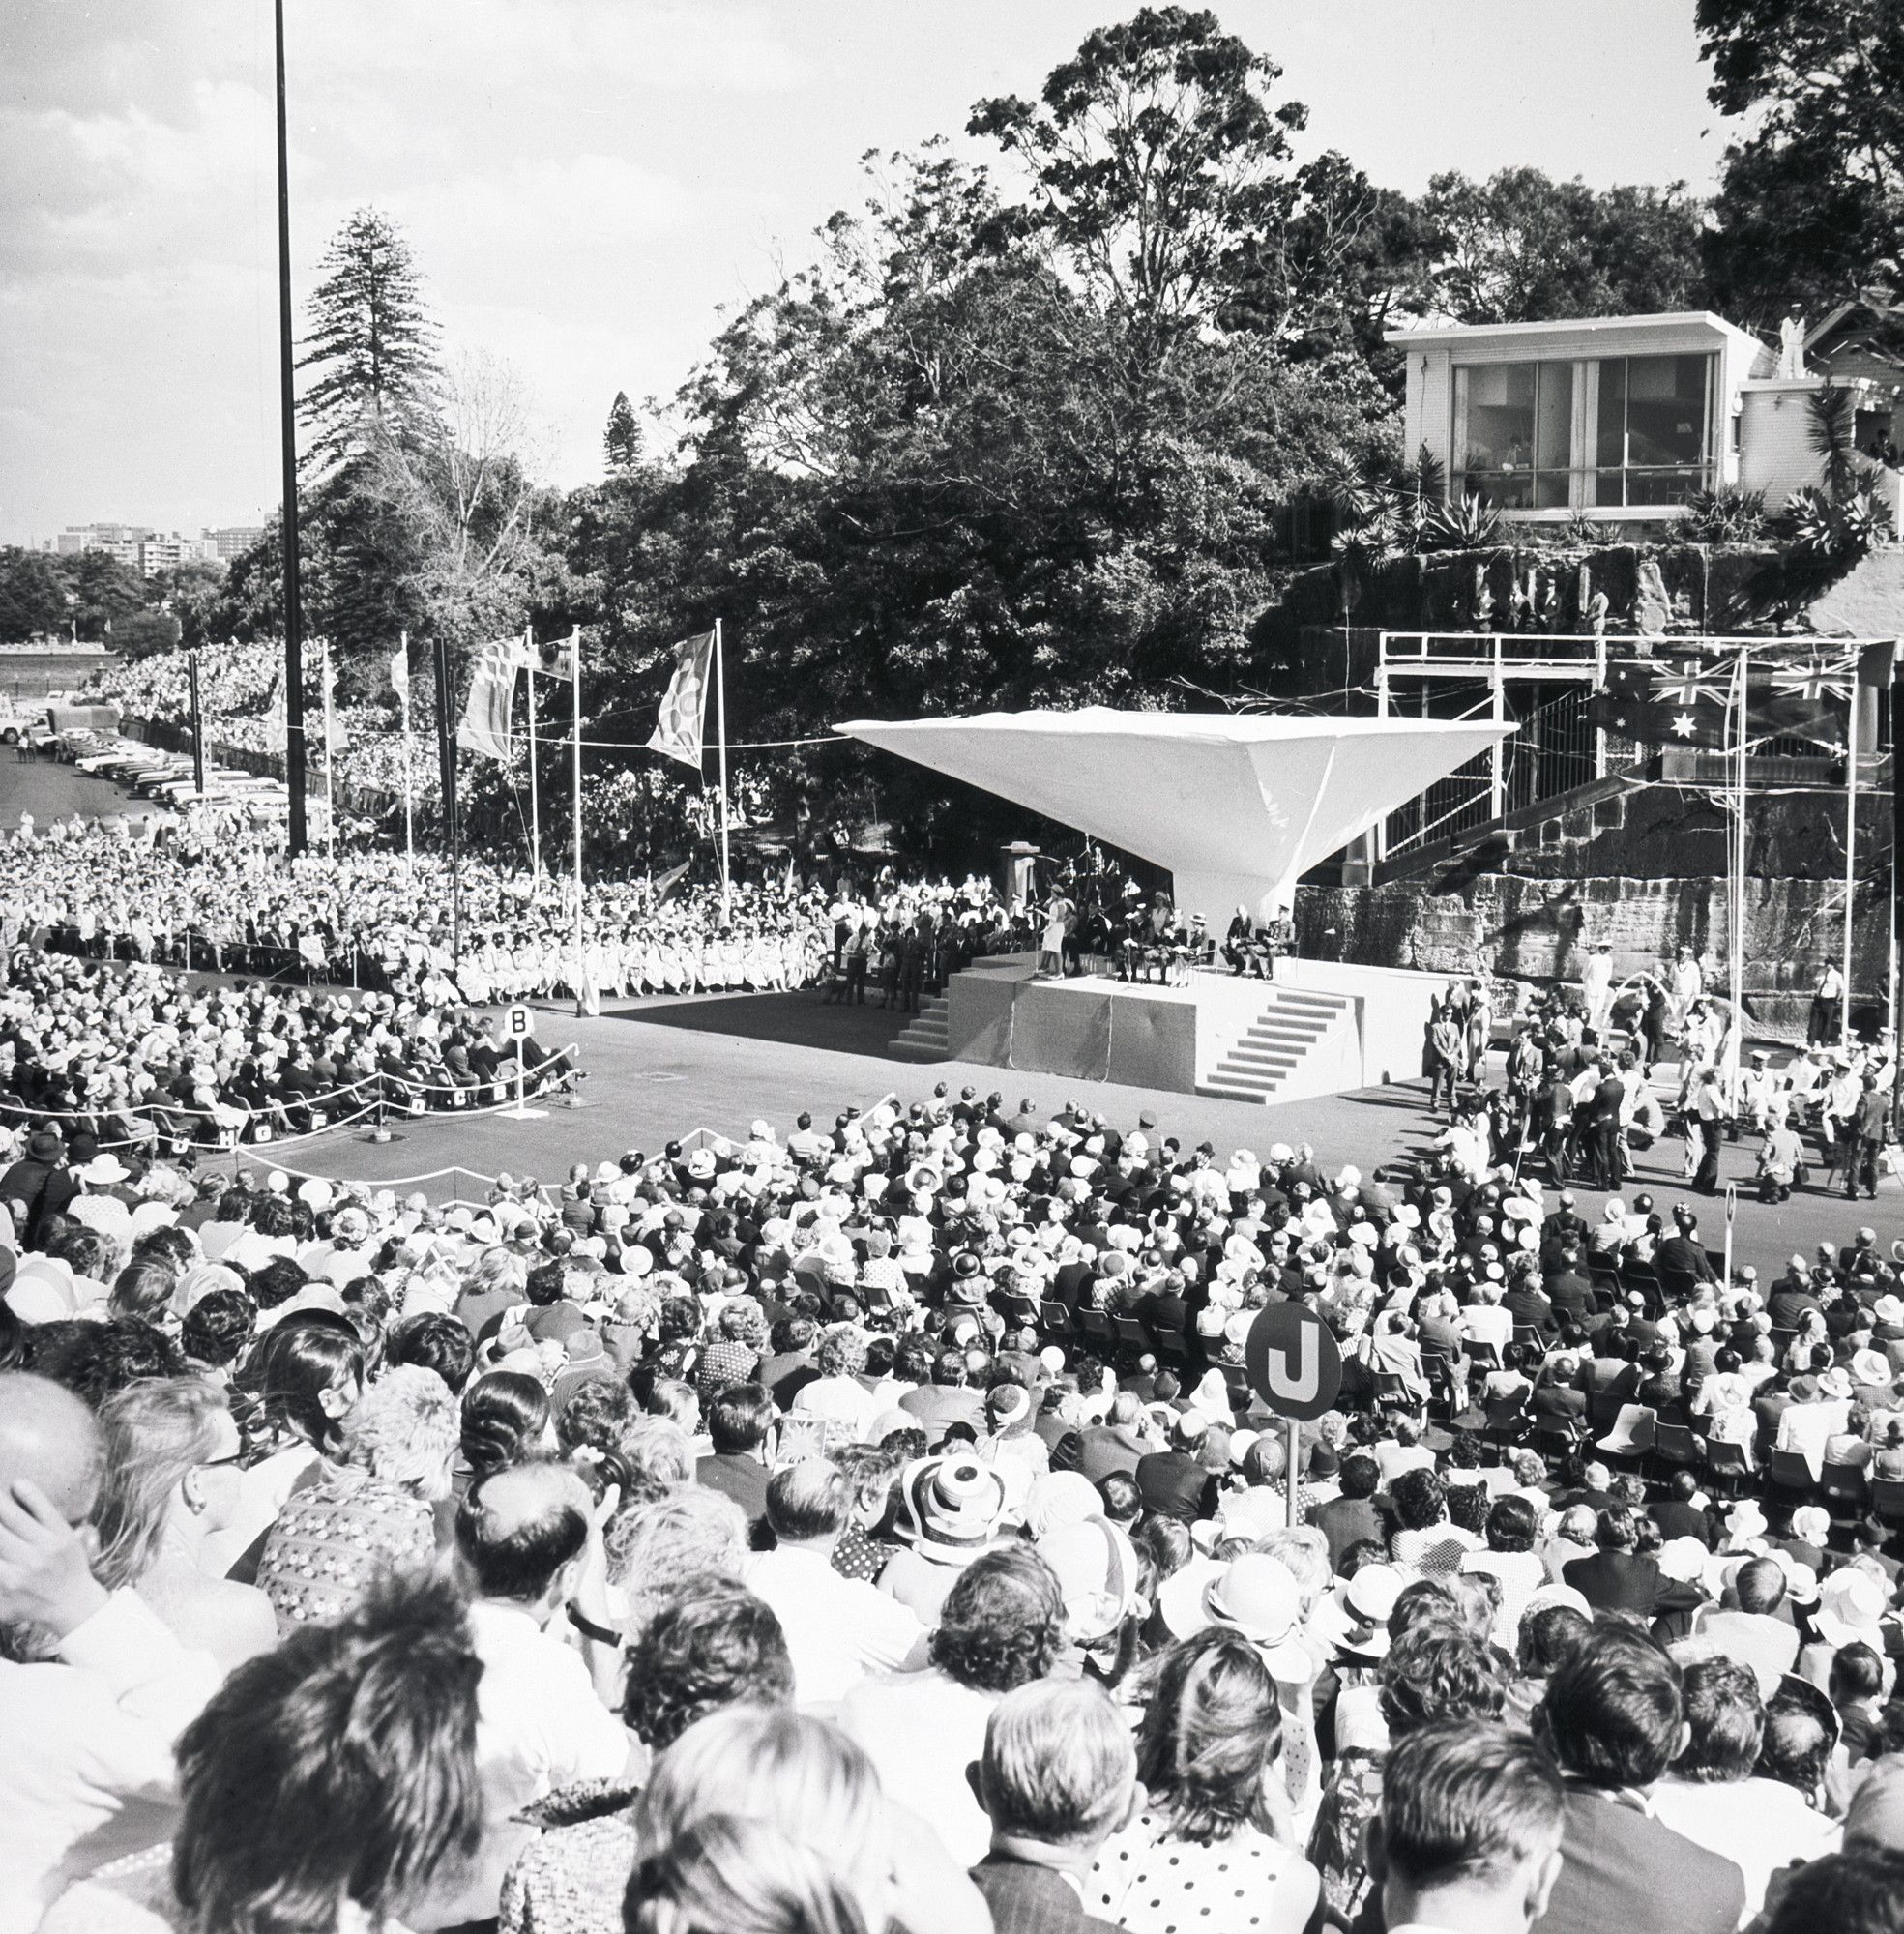 Her Majesty the Queen delivering her speech at the opening of the Opera House from a podium constructed in the forecourt in 1973